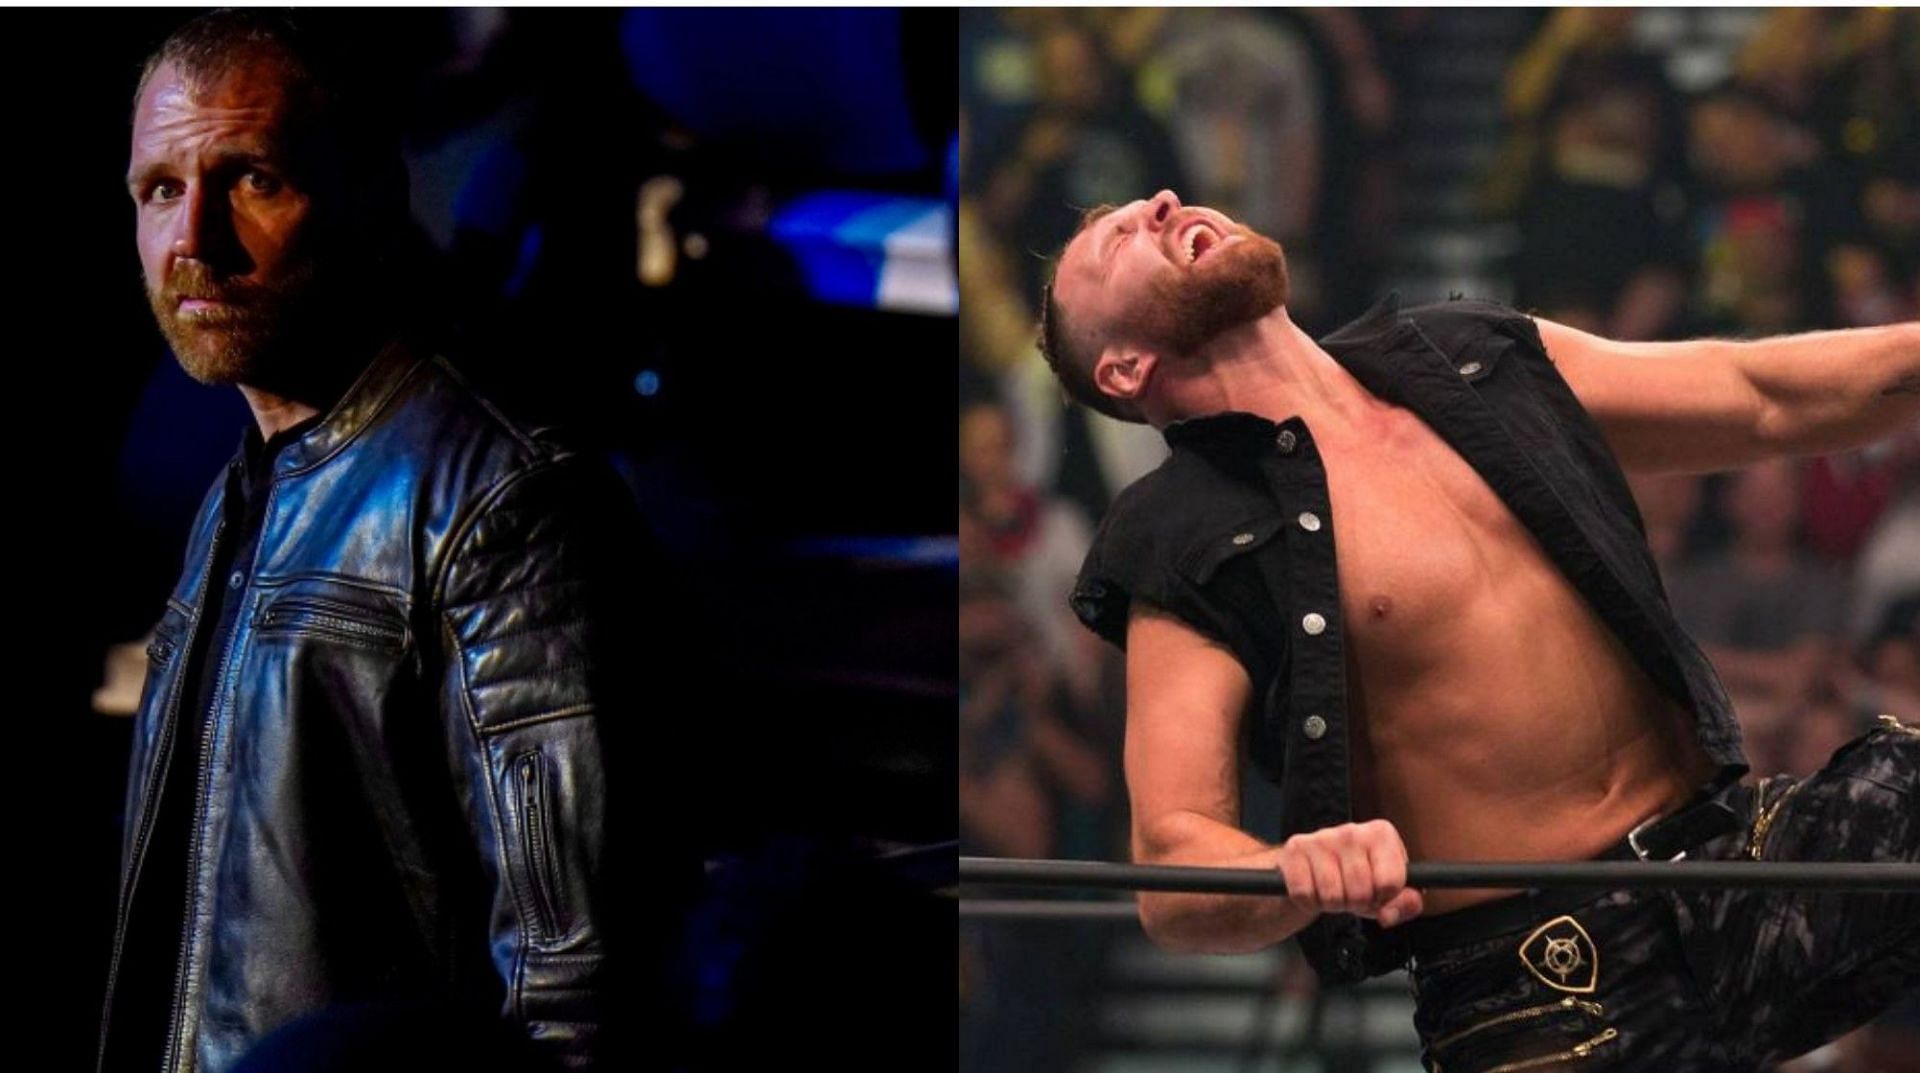 Jon Moxley has a busy wrestling schedule next week!